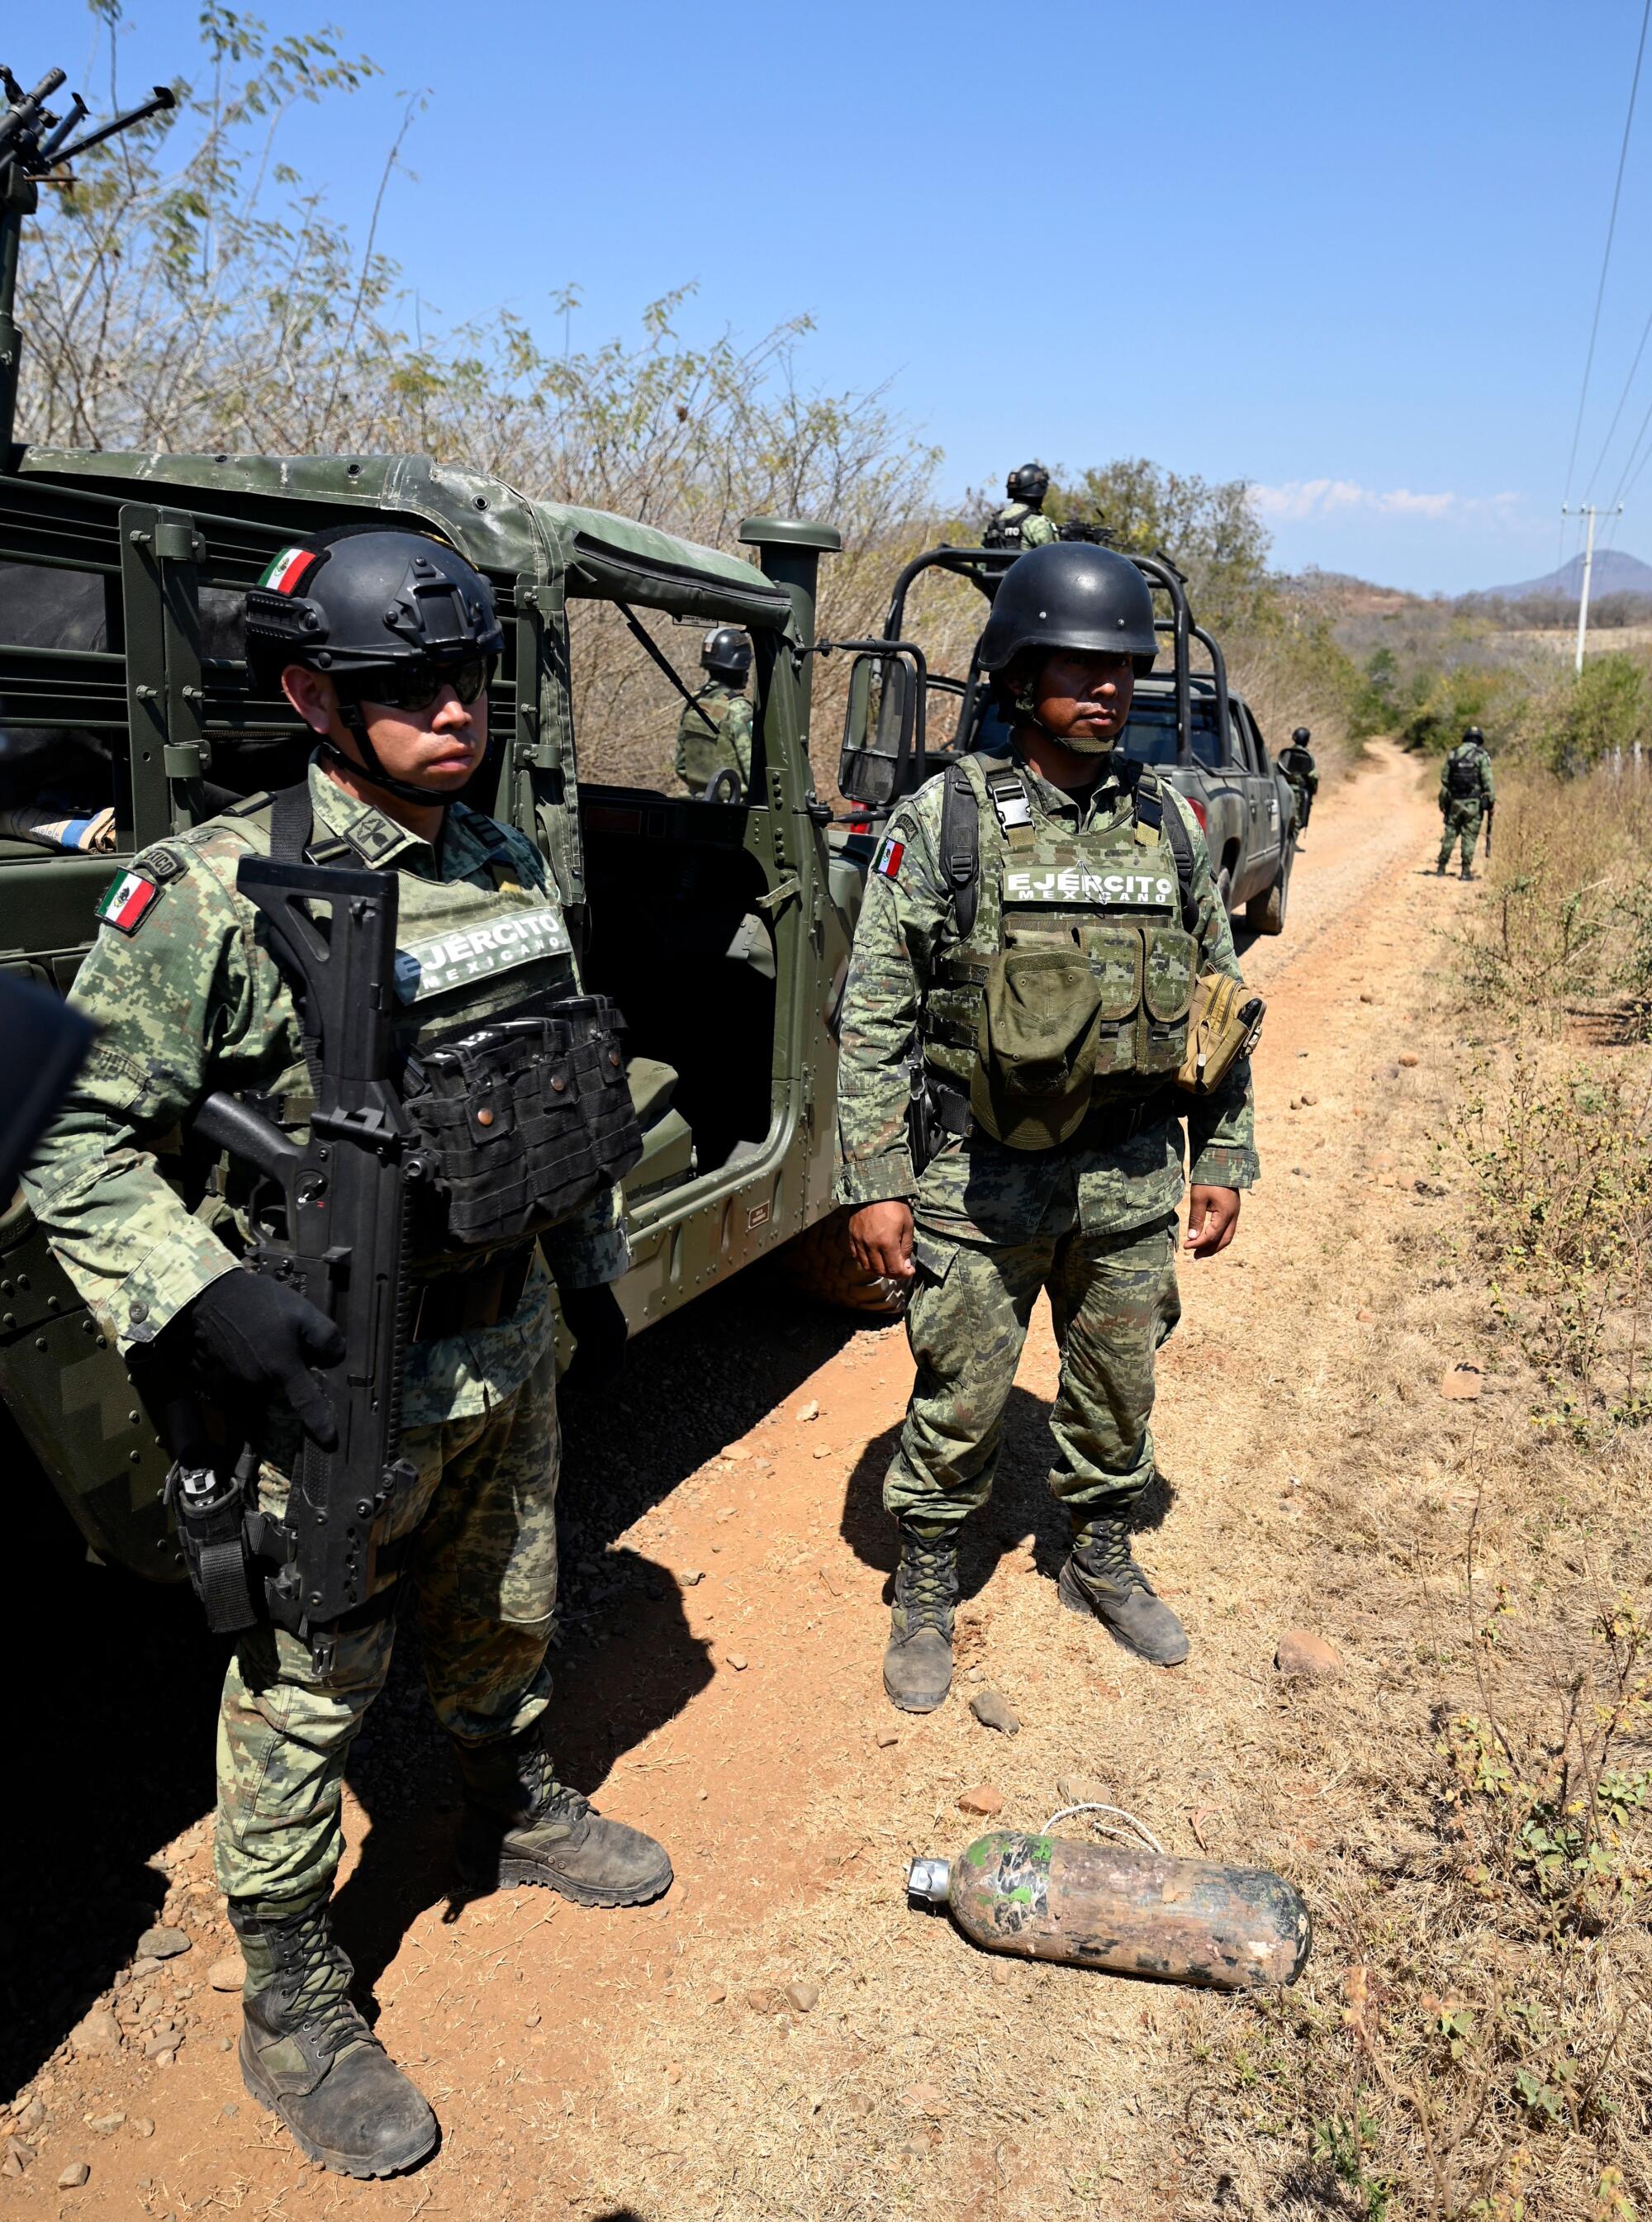 Soldiers of the special forces of the Mexican army show an explosive device on the side of a dirt road.